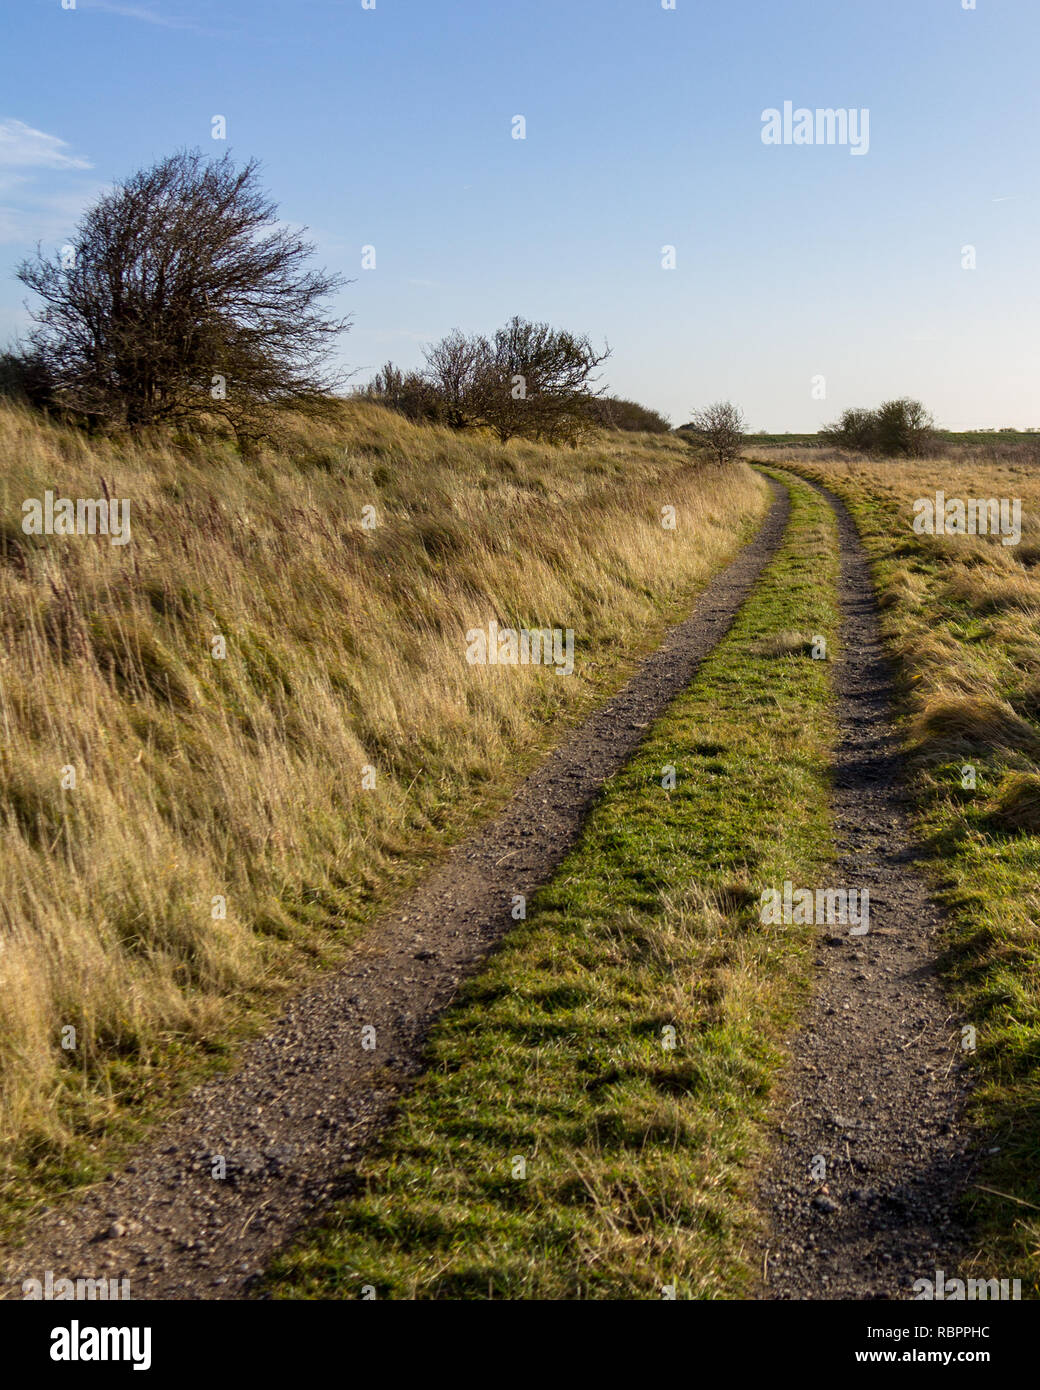 Windswept trees and grass dominate the landscape along a curved path at Donna Nook Nature Reserve in Lincolnshire, Engand, UK Stock Photo